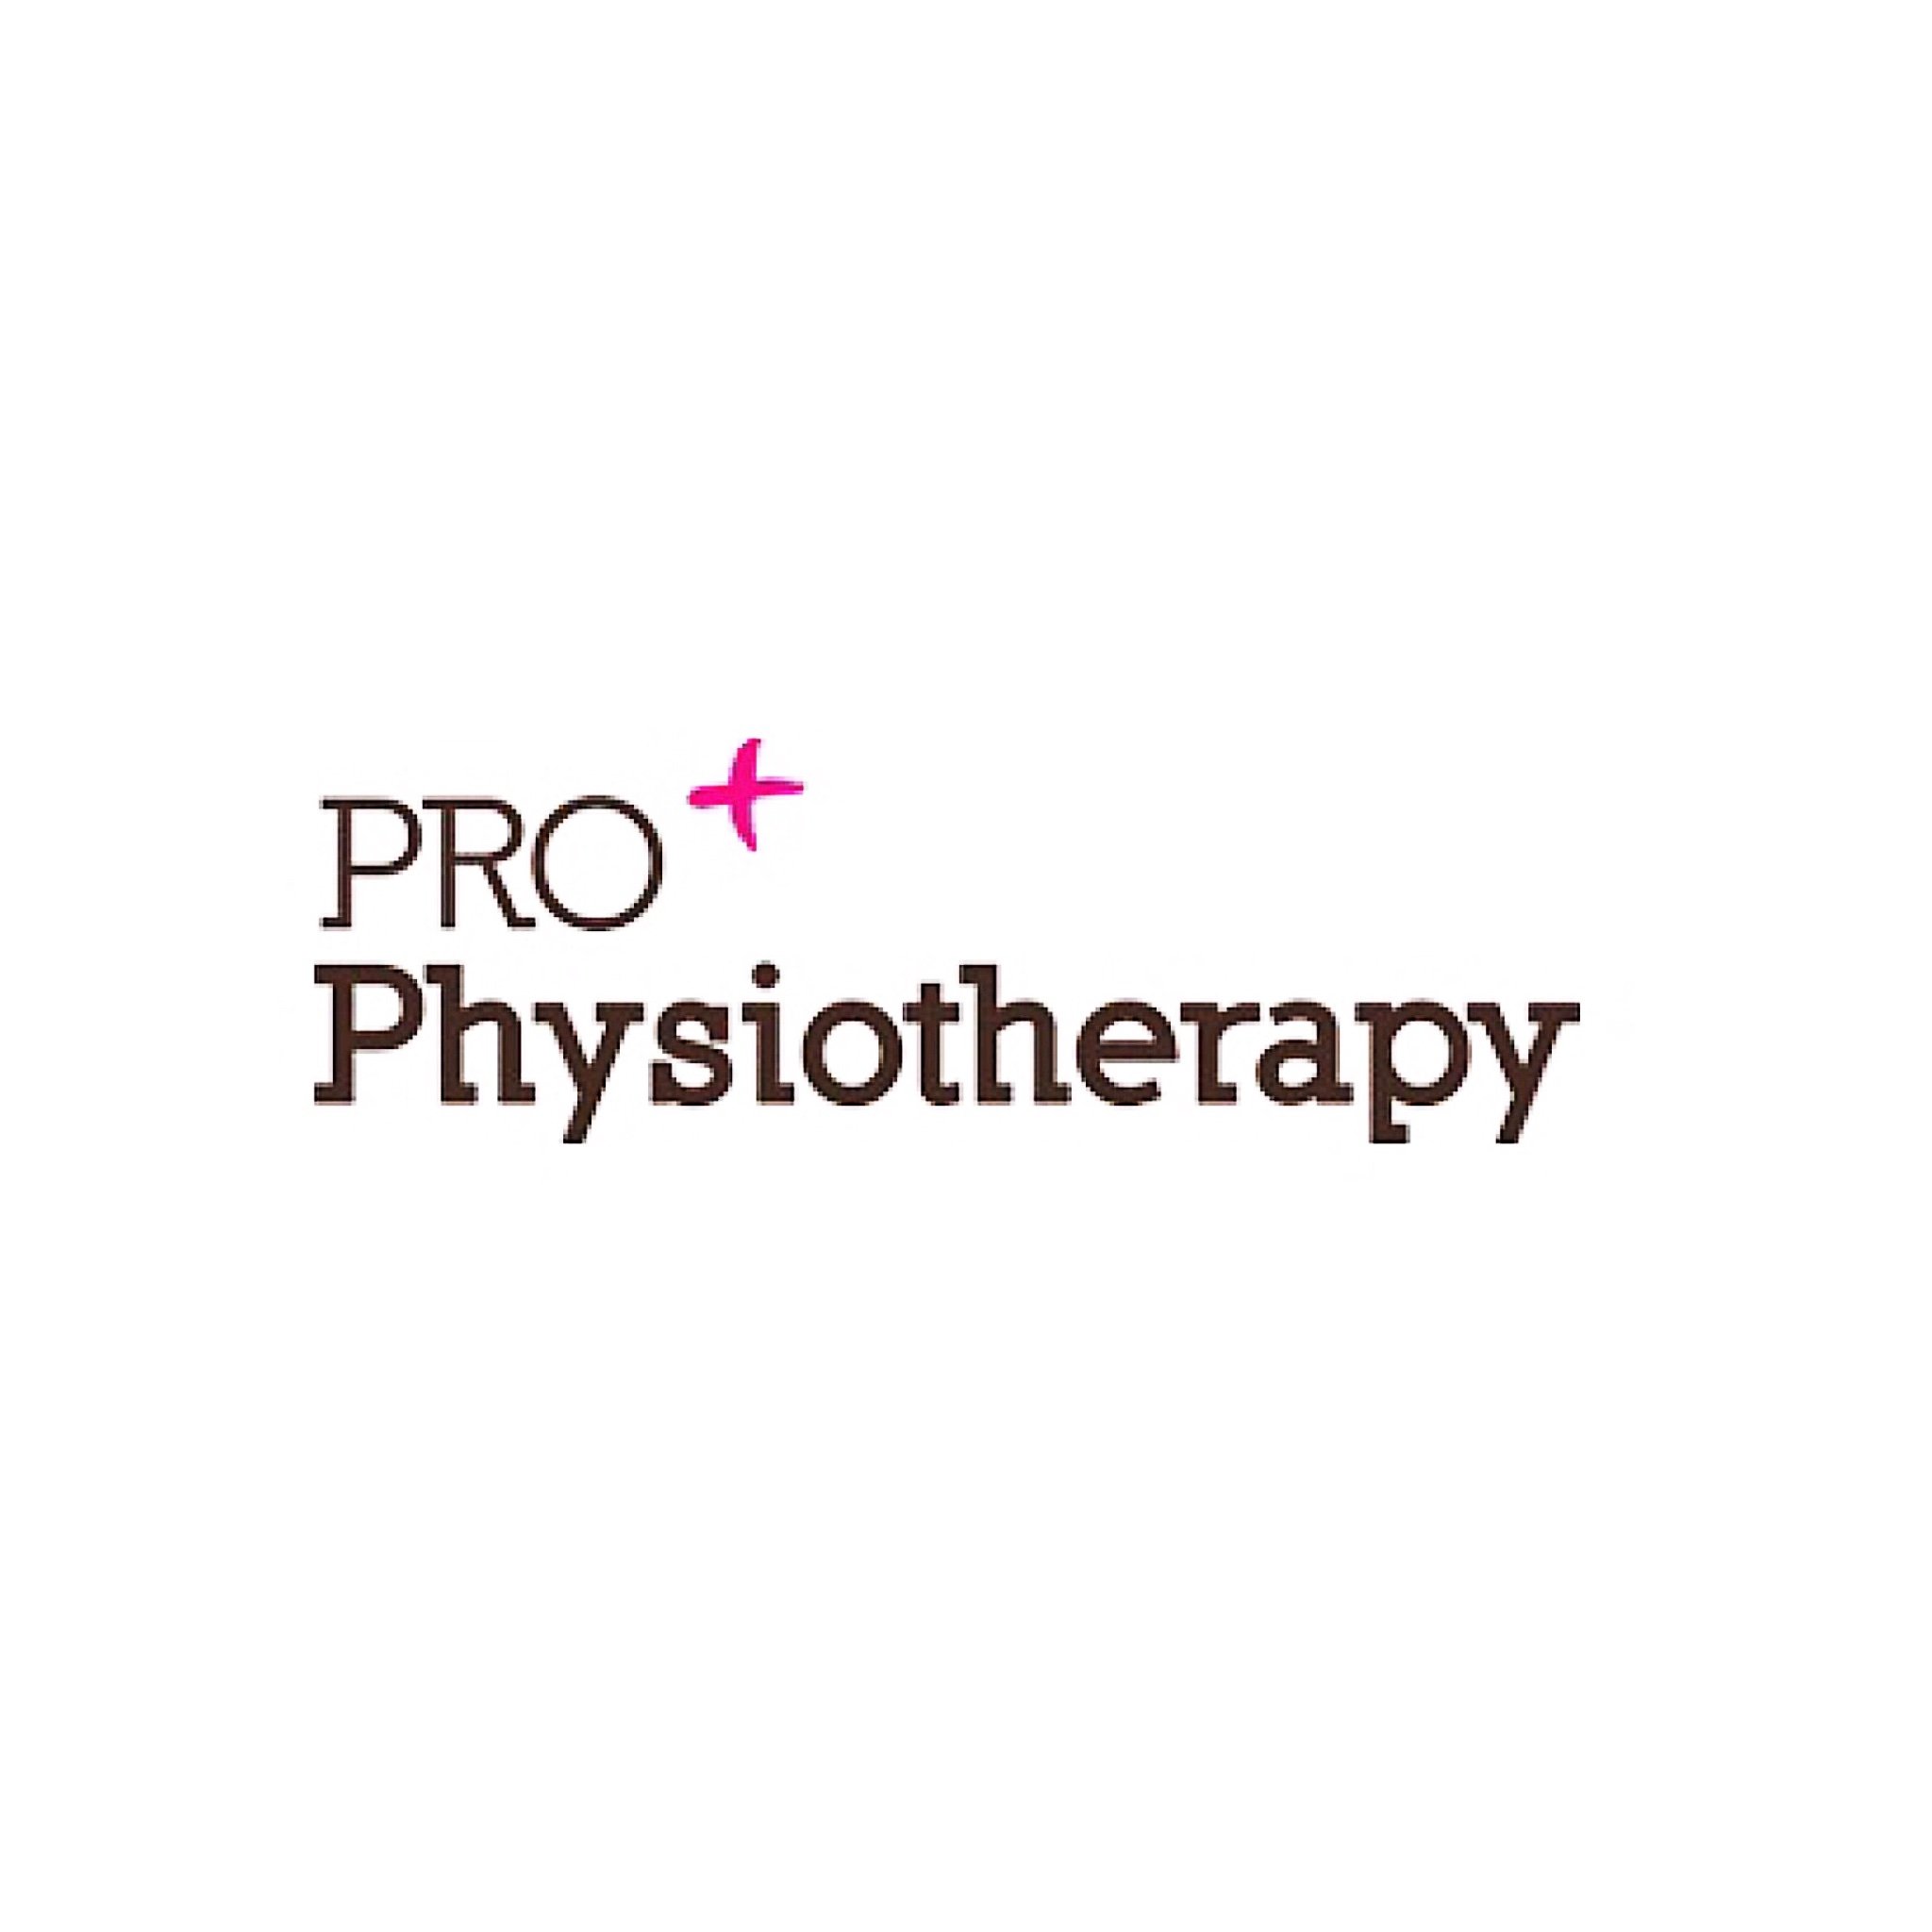 South West London Physiotherapy clinic based in Earlsfield and Wimbledon. Give us a call... We're friendly! 0208 879 1555